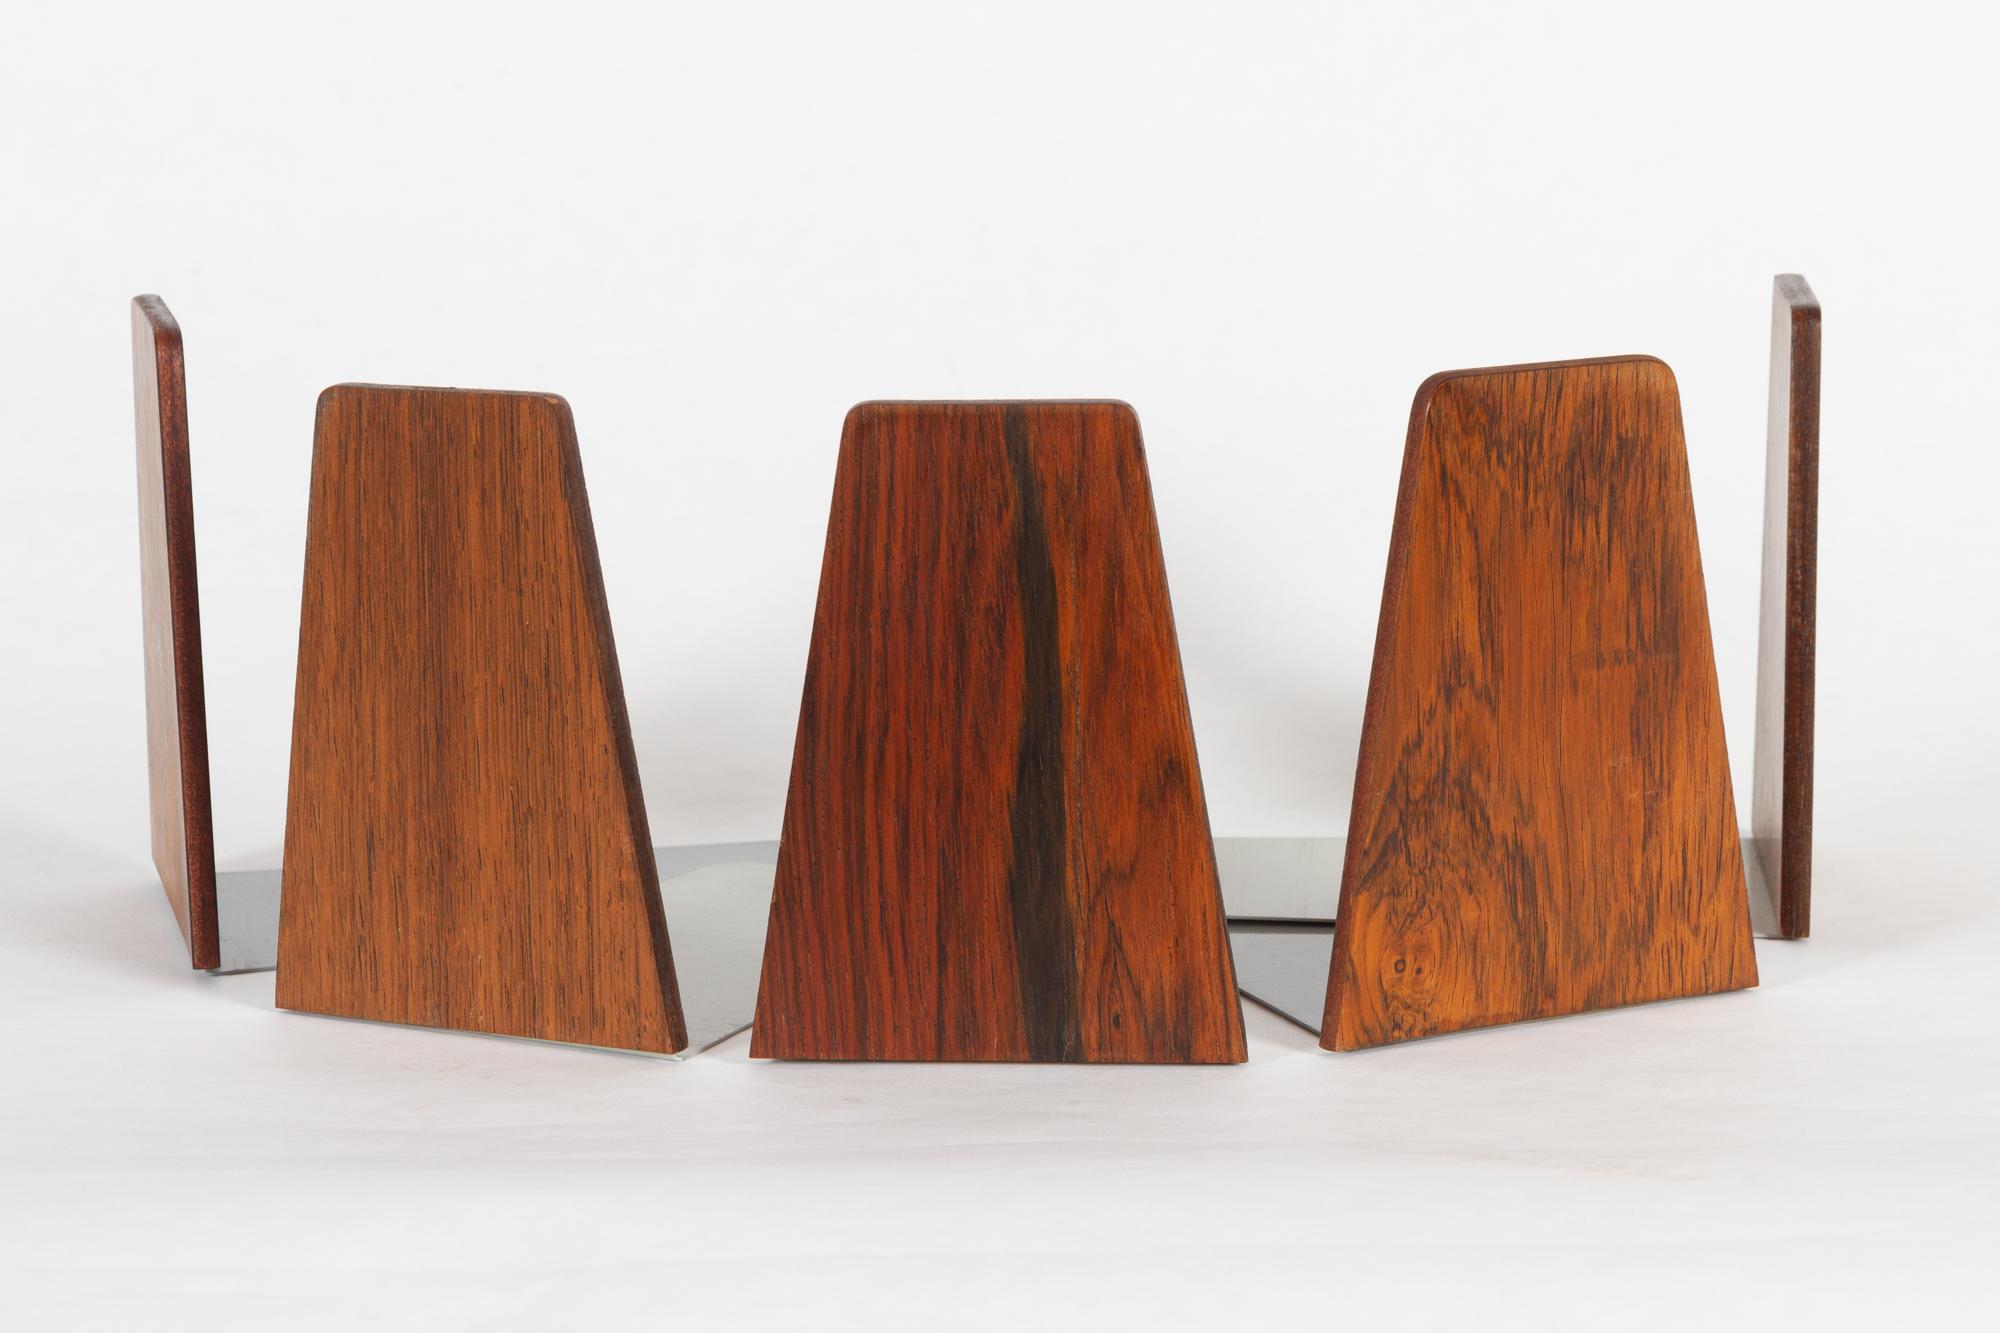 Midcentury bookends by Kai Kristiansen for FM 1960s, set of 5
Very decorative Danish modern bookends in rosewood and metal designed by Danish designer Kai Kristiansen for Feldballes Møbelfabrik.
Very good condition. Cleaned and polished.